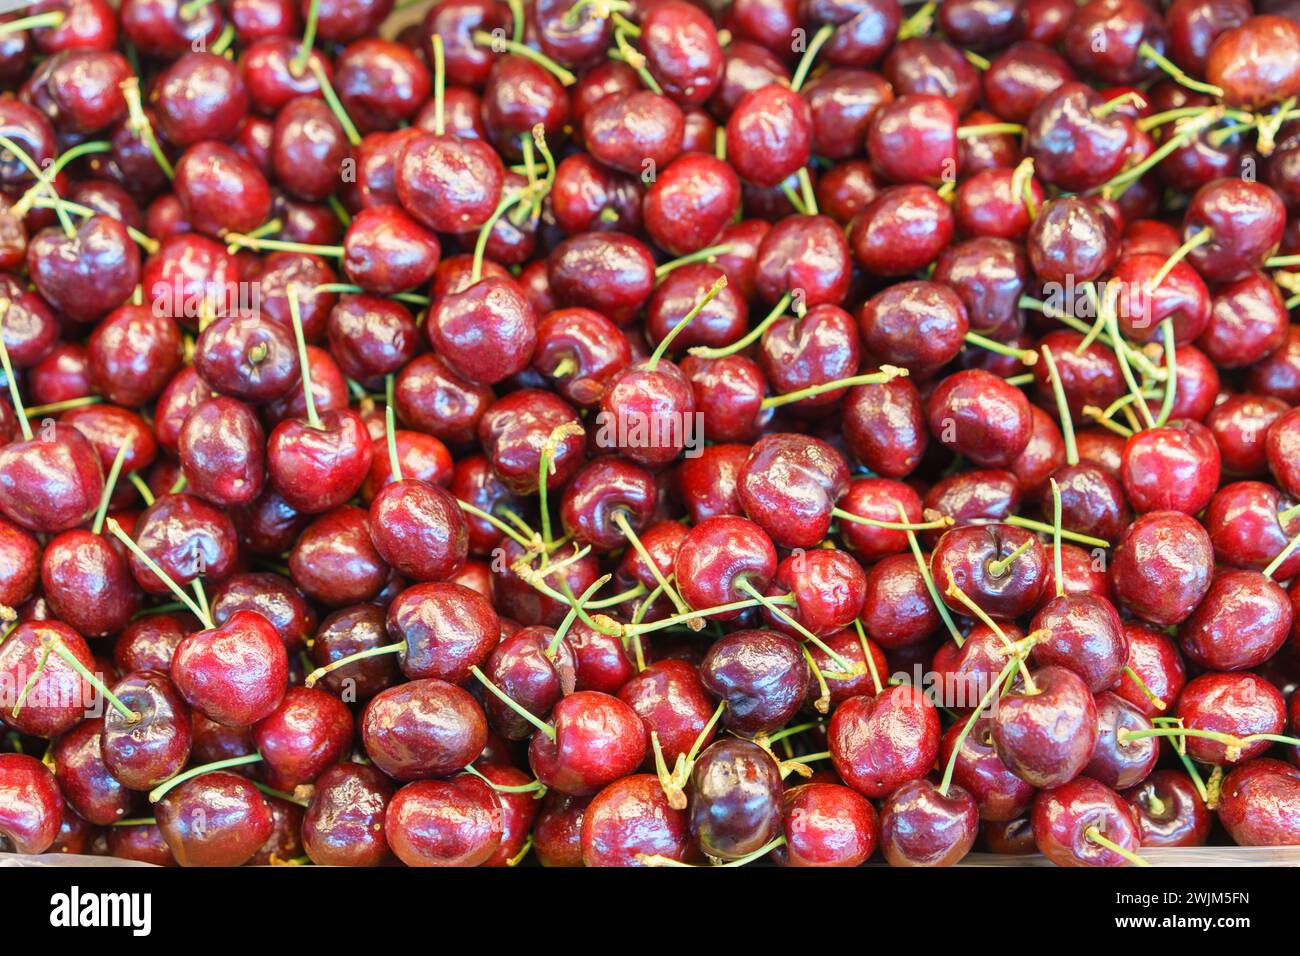 A large heap of shiny, ripe cherries with stems, offering a fresh and juicy texture, displayed at a fruit market Stock Photo